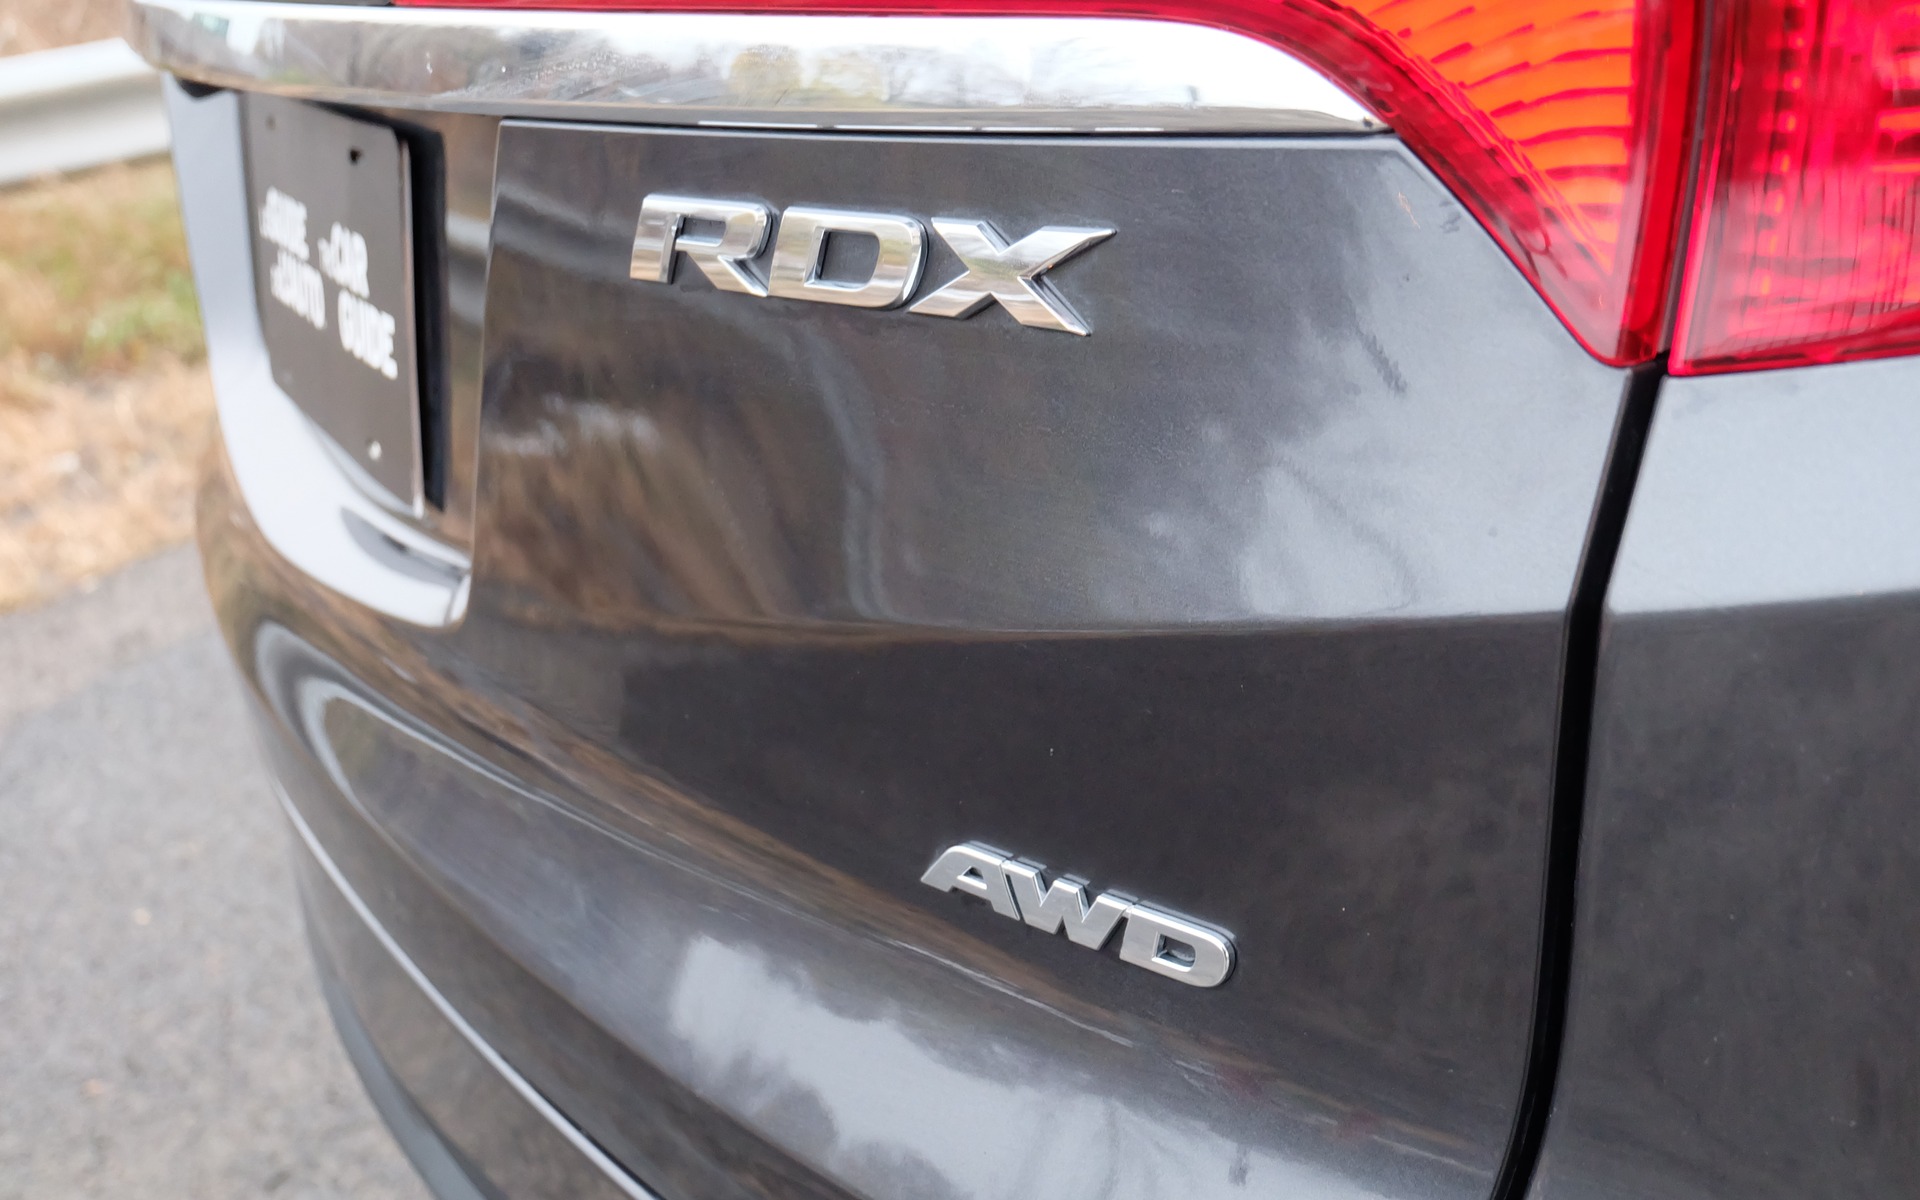 All-wheel drive comes standard, but it isn’t the SH-AWD system.